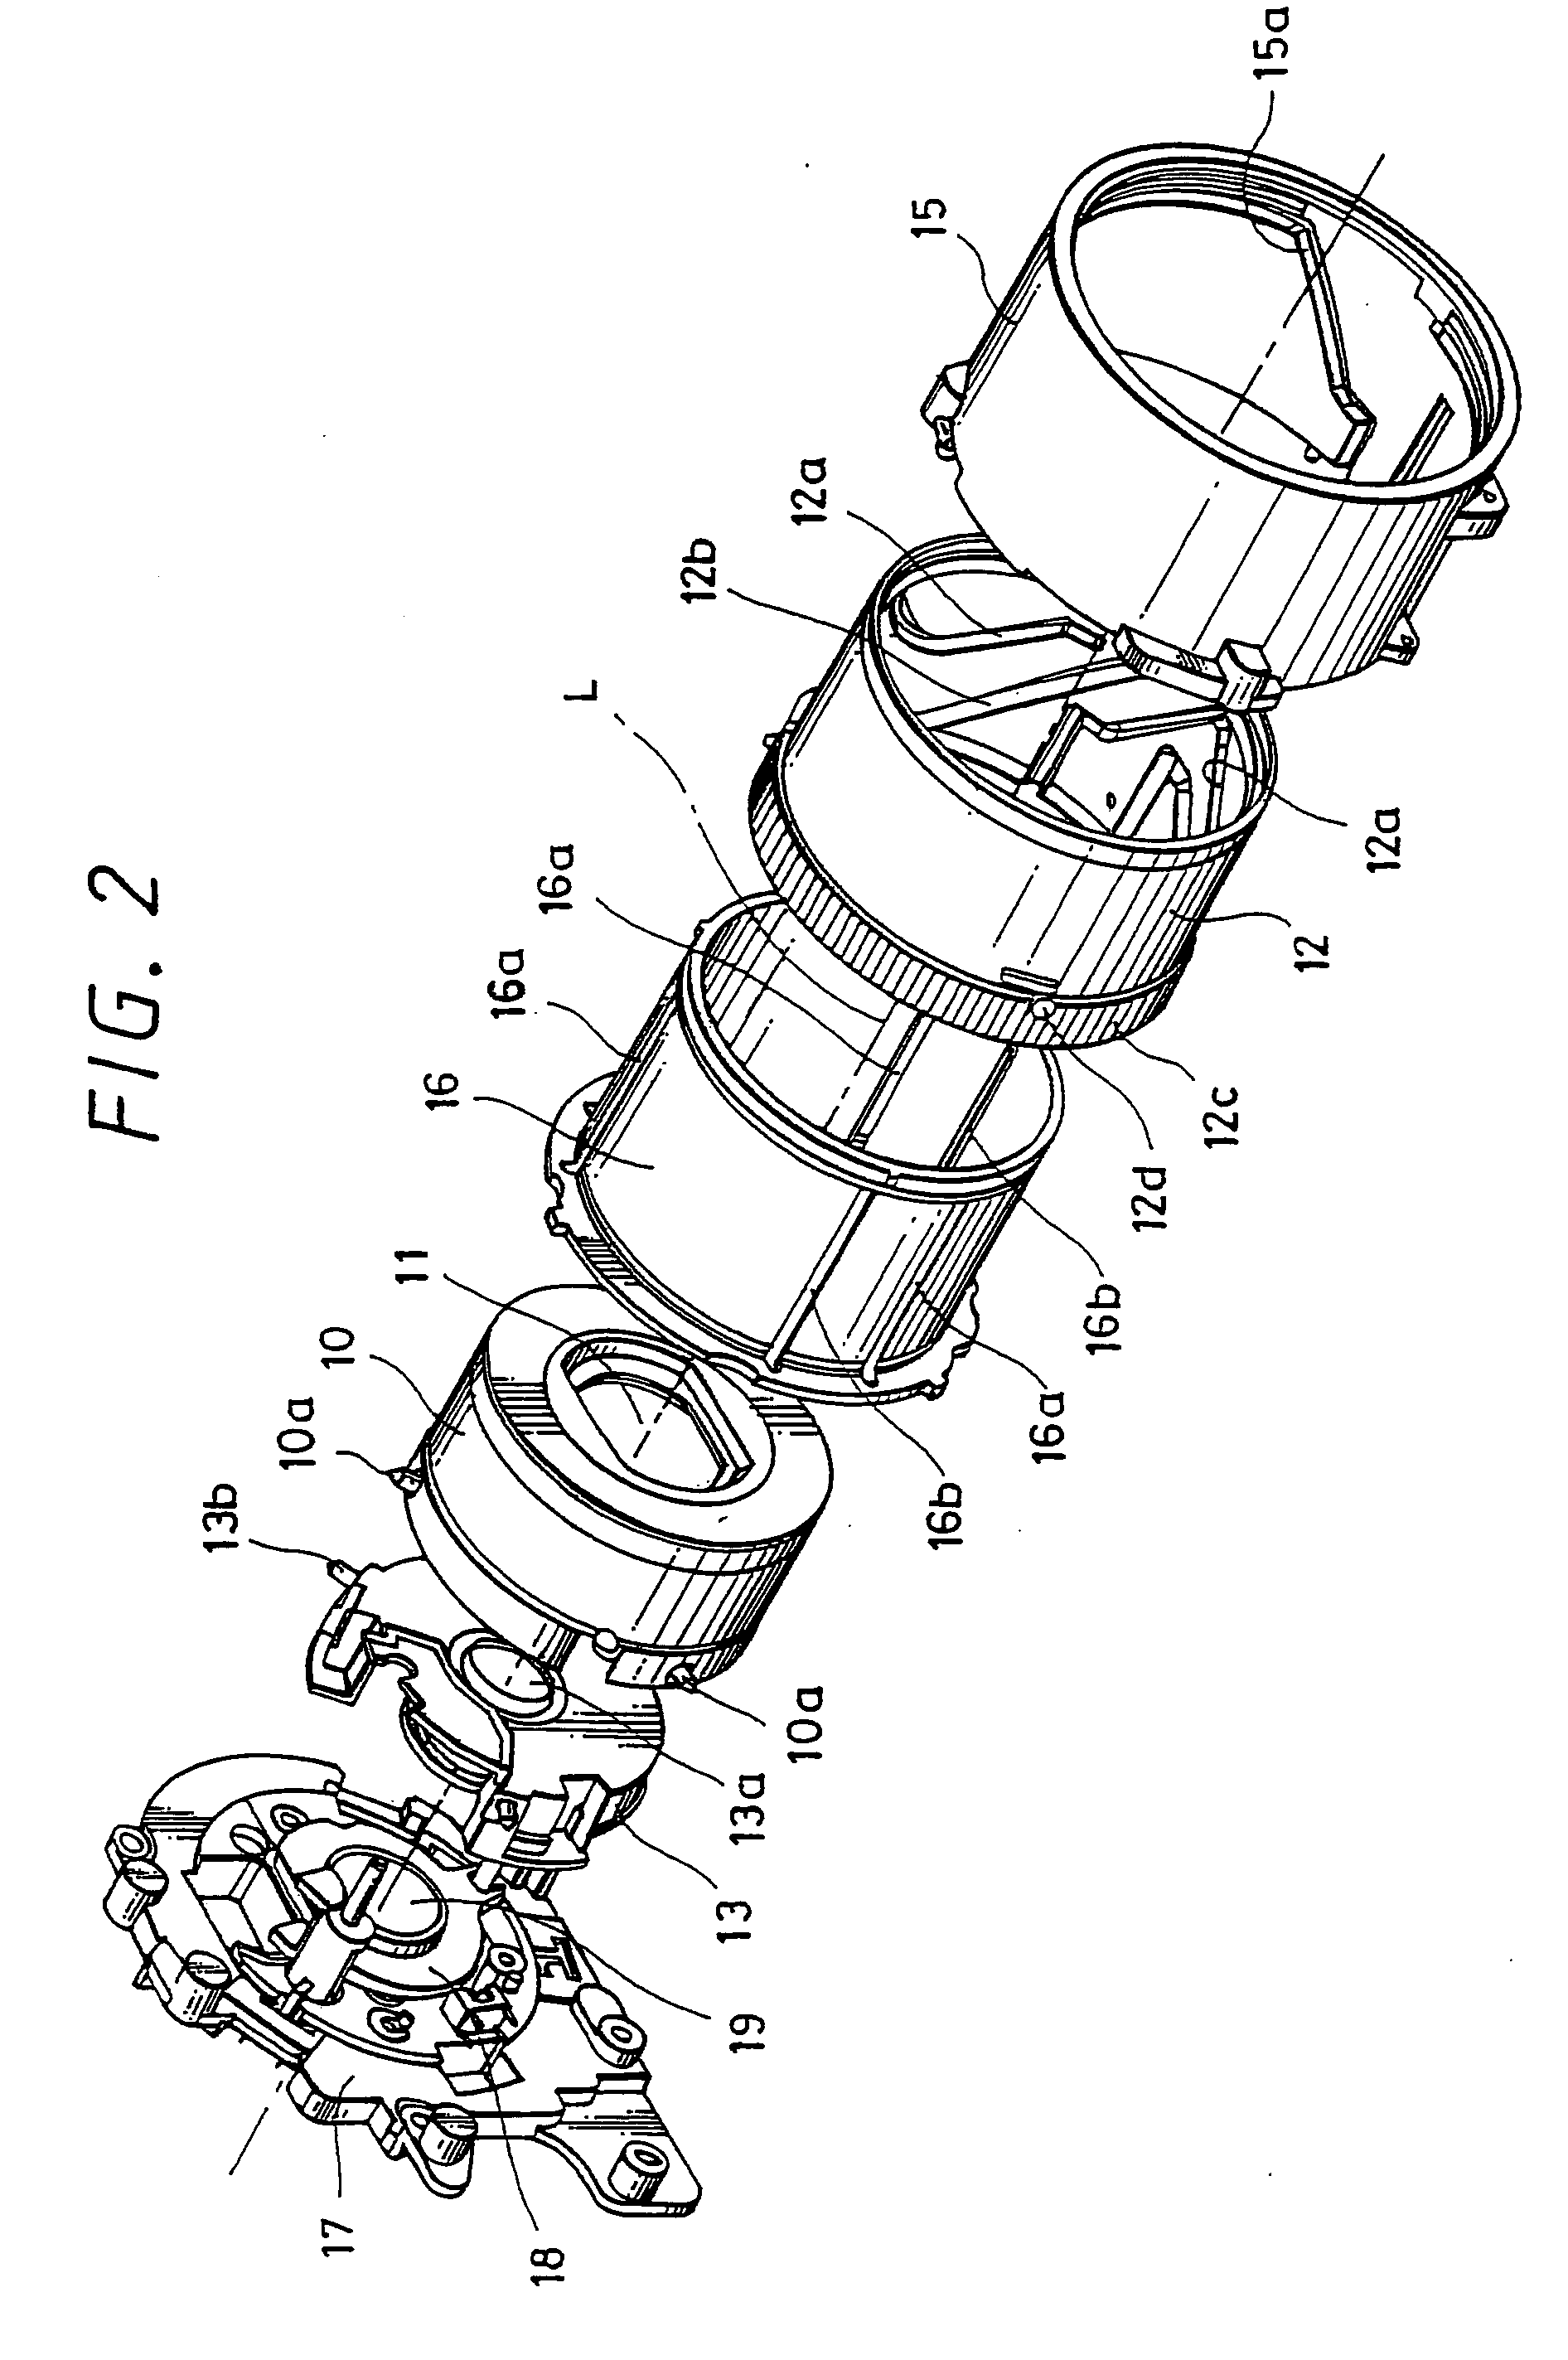 Optical unit and imaging device